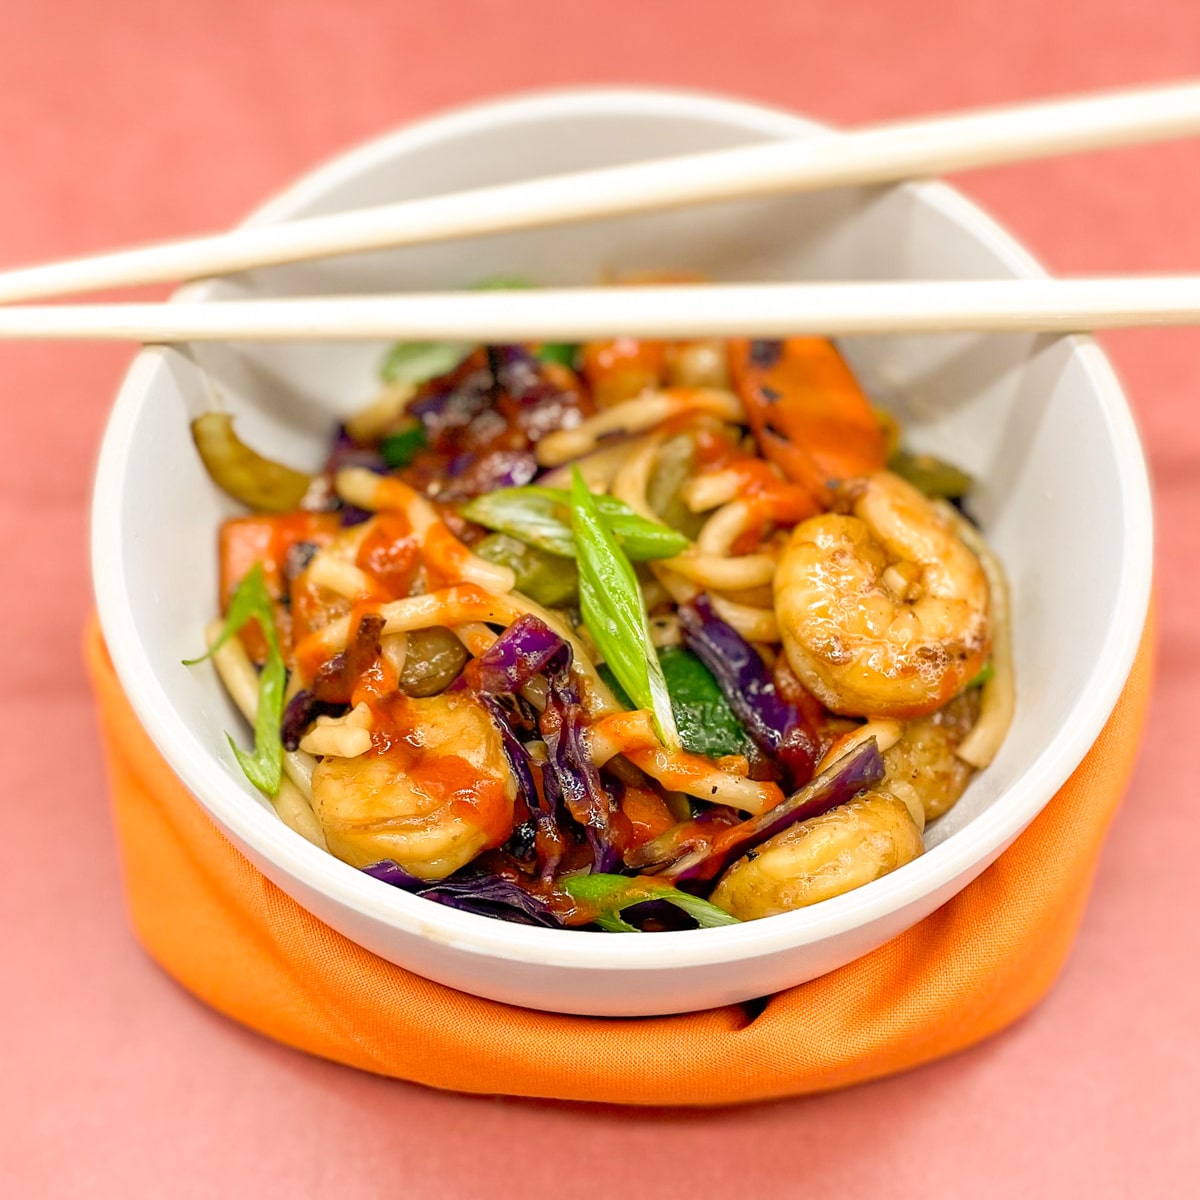 Wok-fried shrimp, udon noodles, carrot, celery, red cabbage and green onion in a white bowl with chopsticks on a red background with an orange napkin.